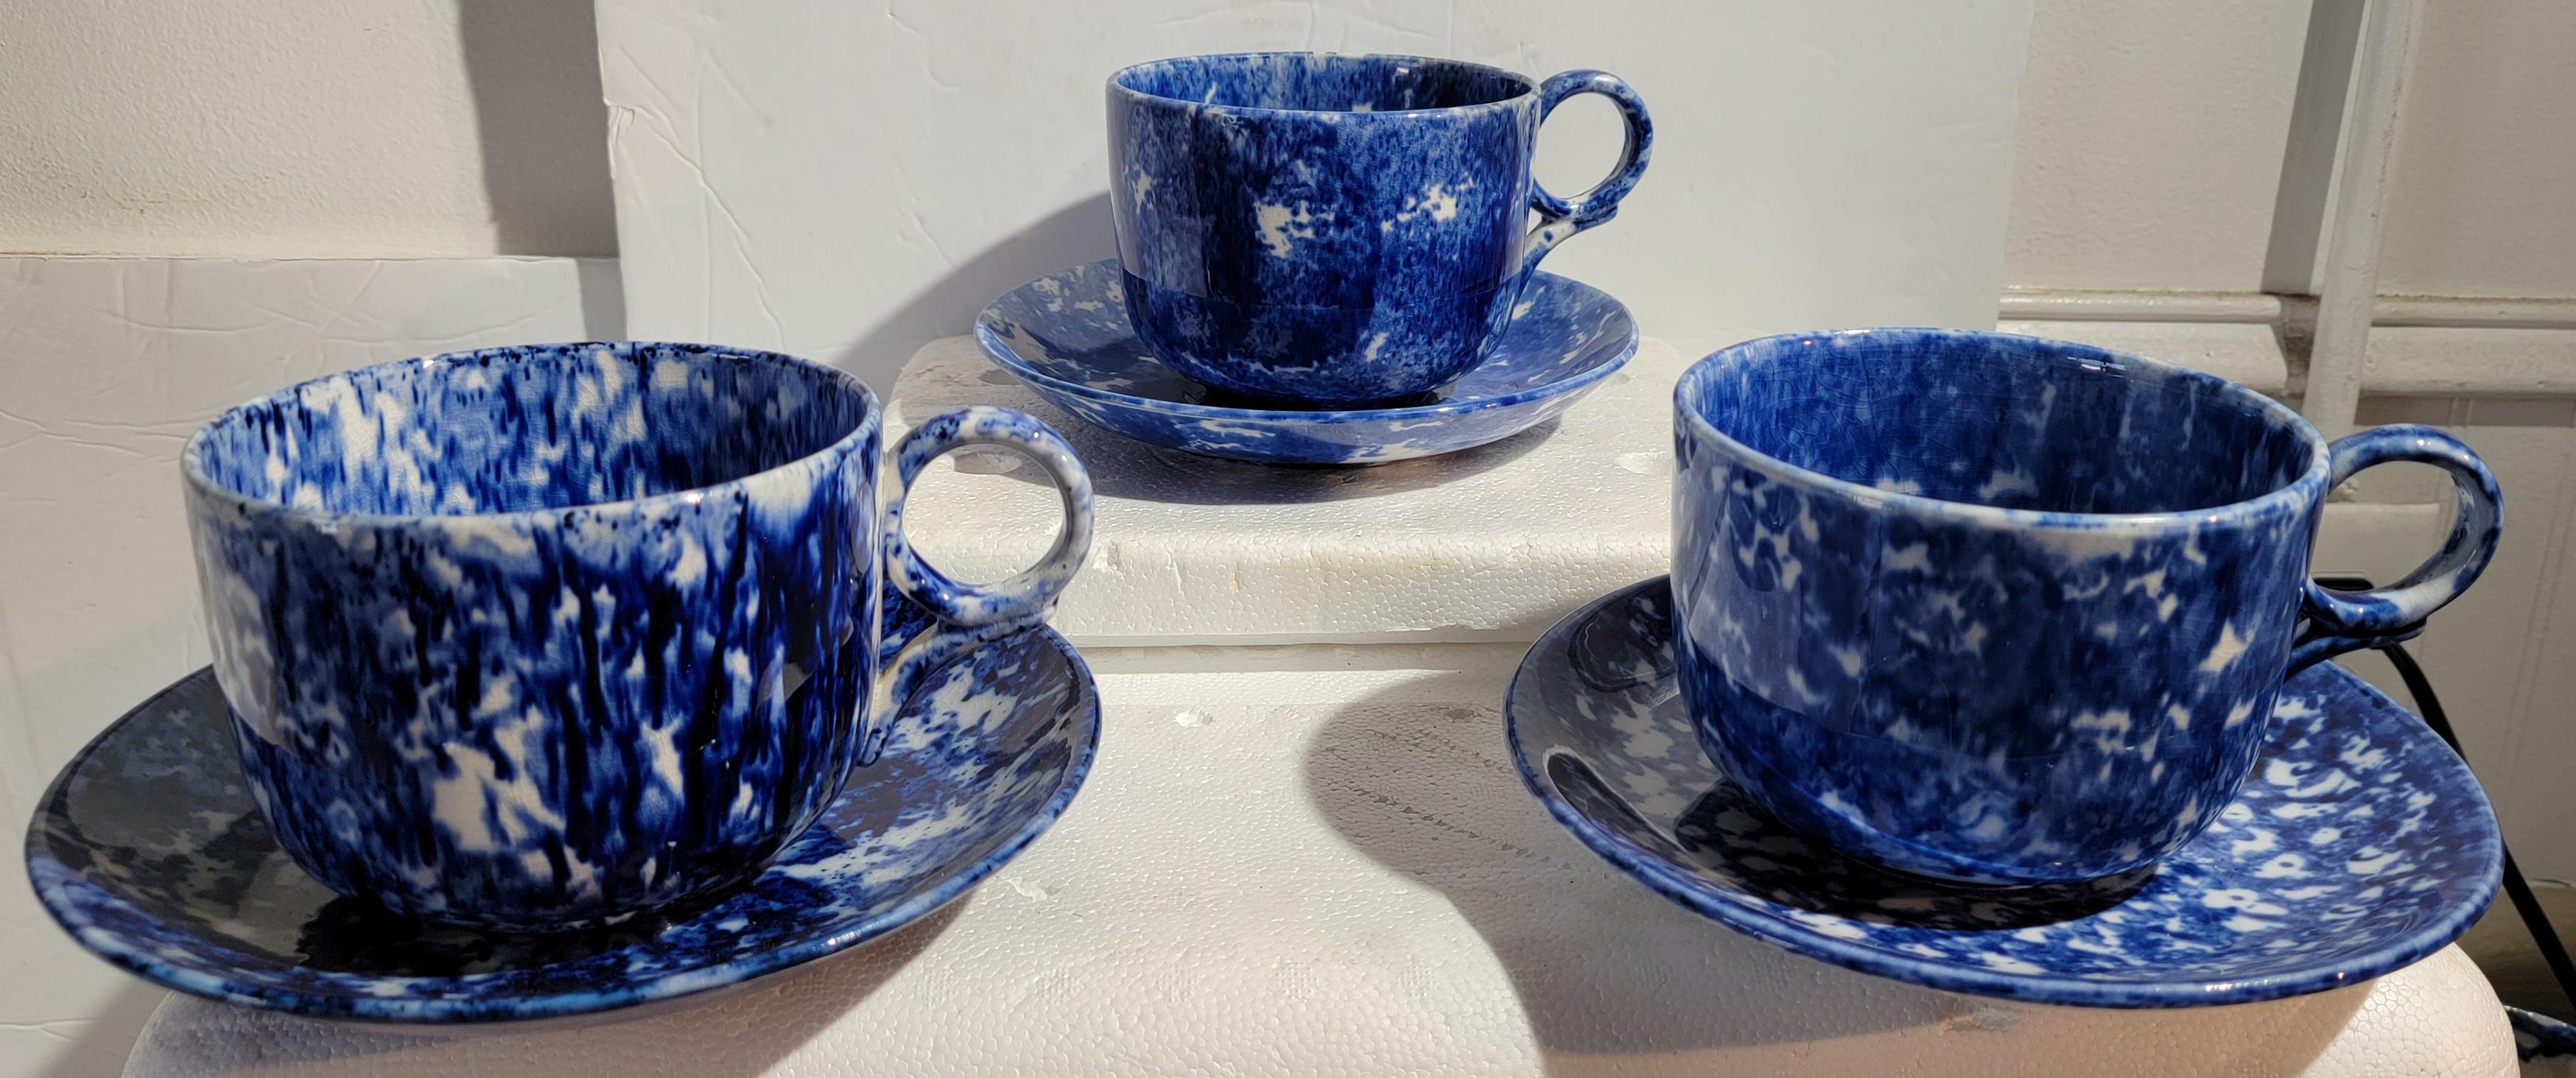 Adirondack 19th C Sponge Mush Cups and Saucers, Set of Four For Sale